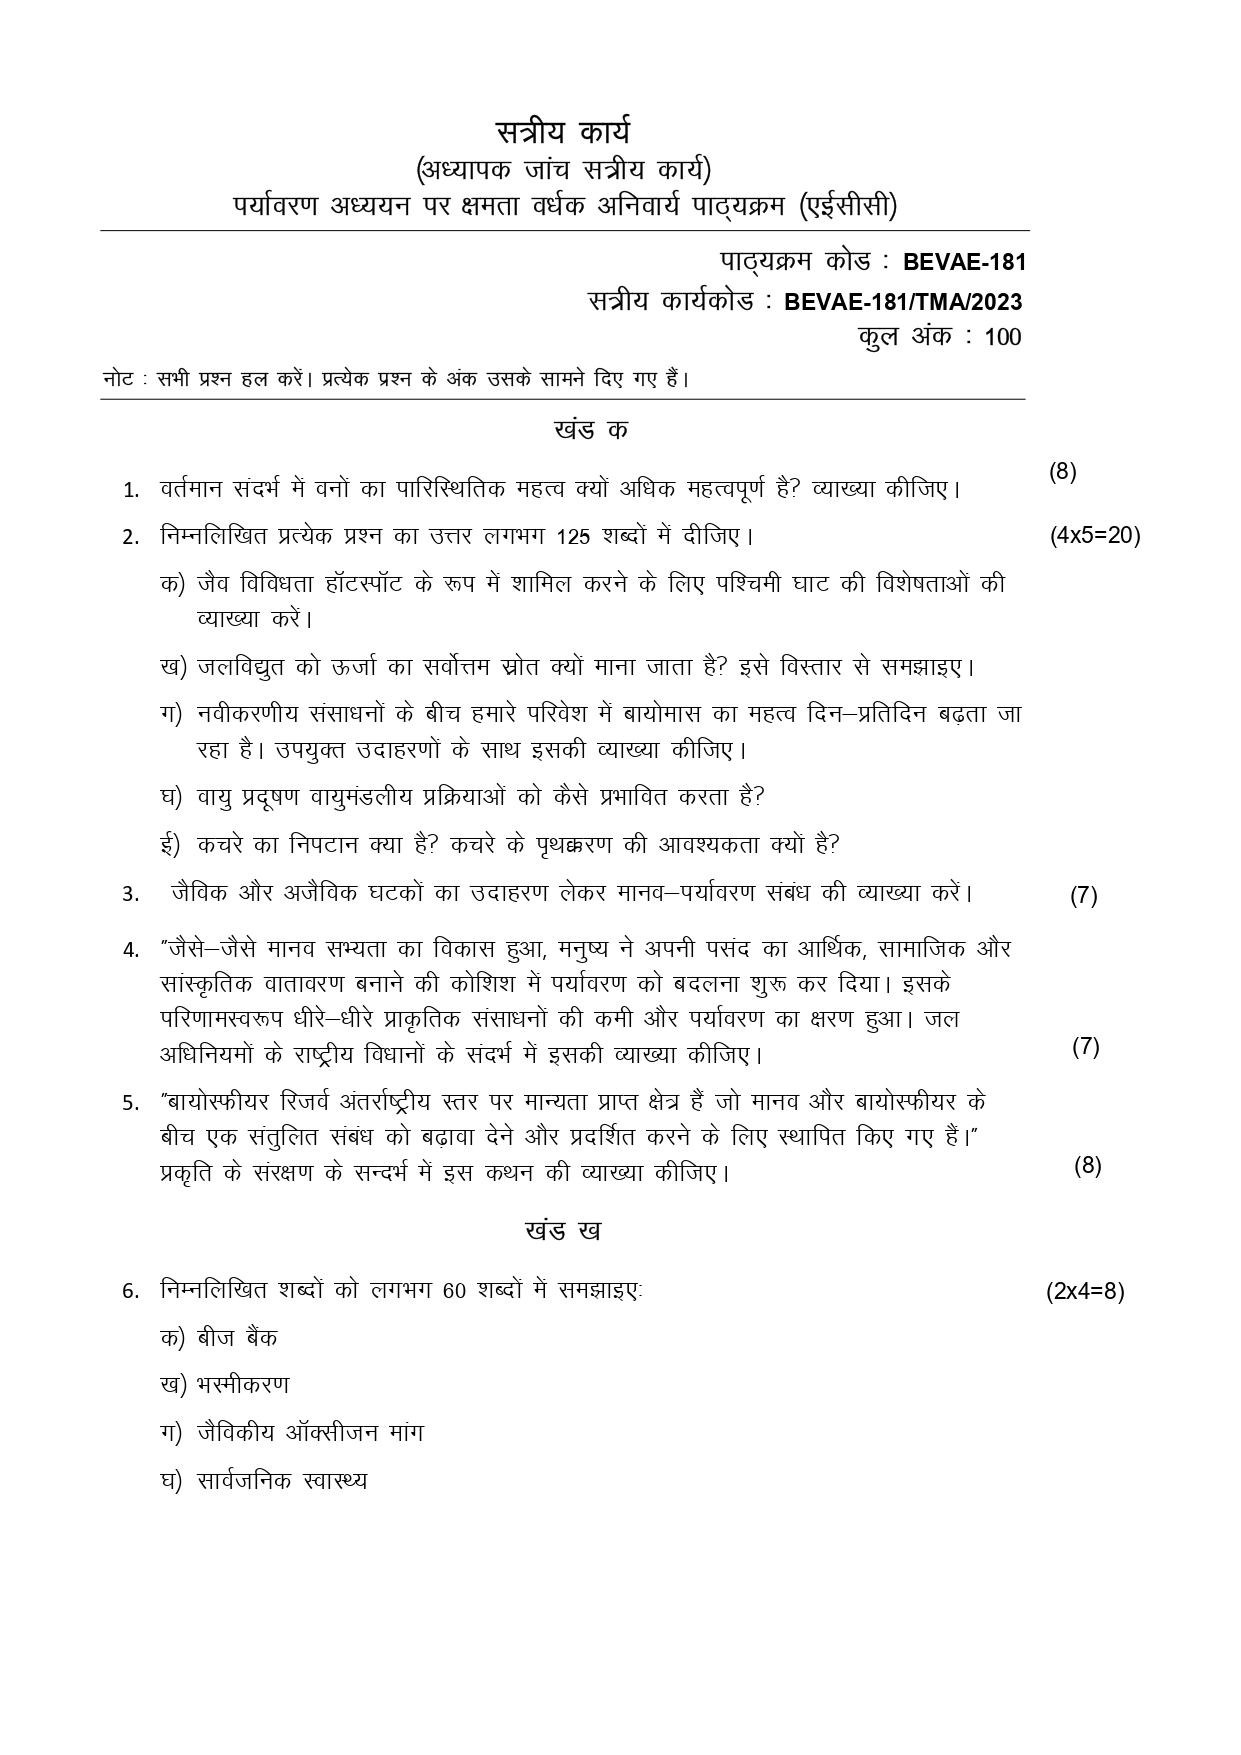 ignou assignment in hindi pdf